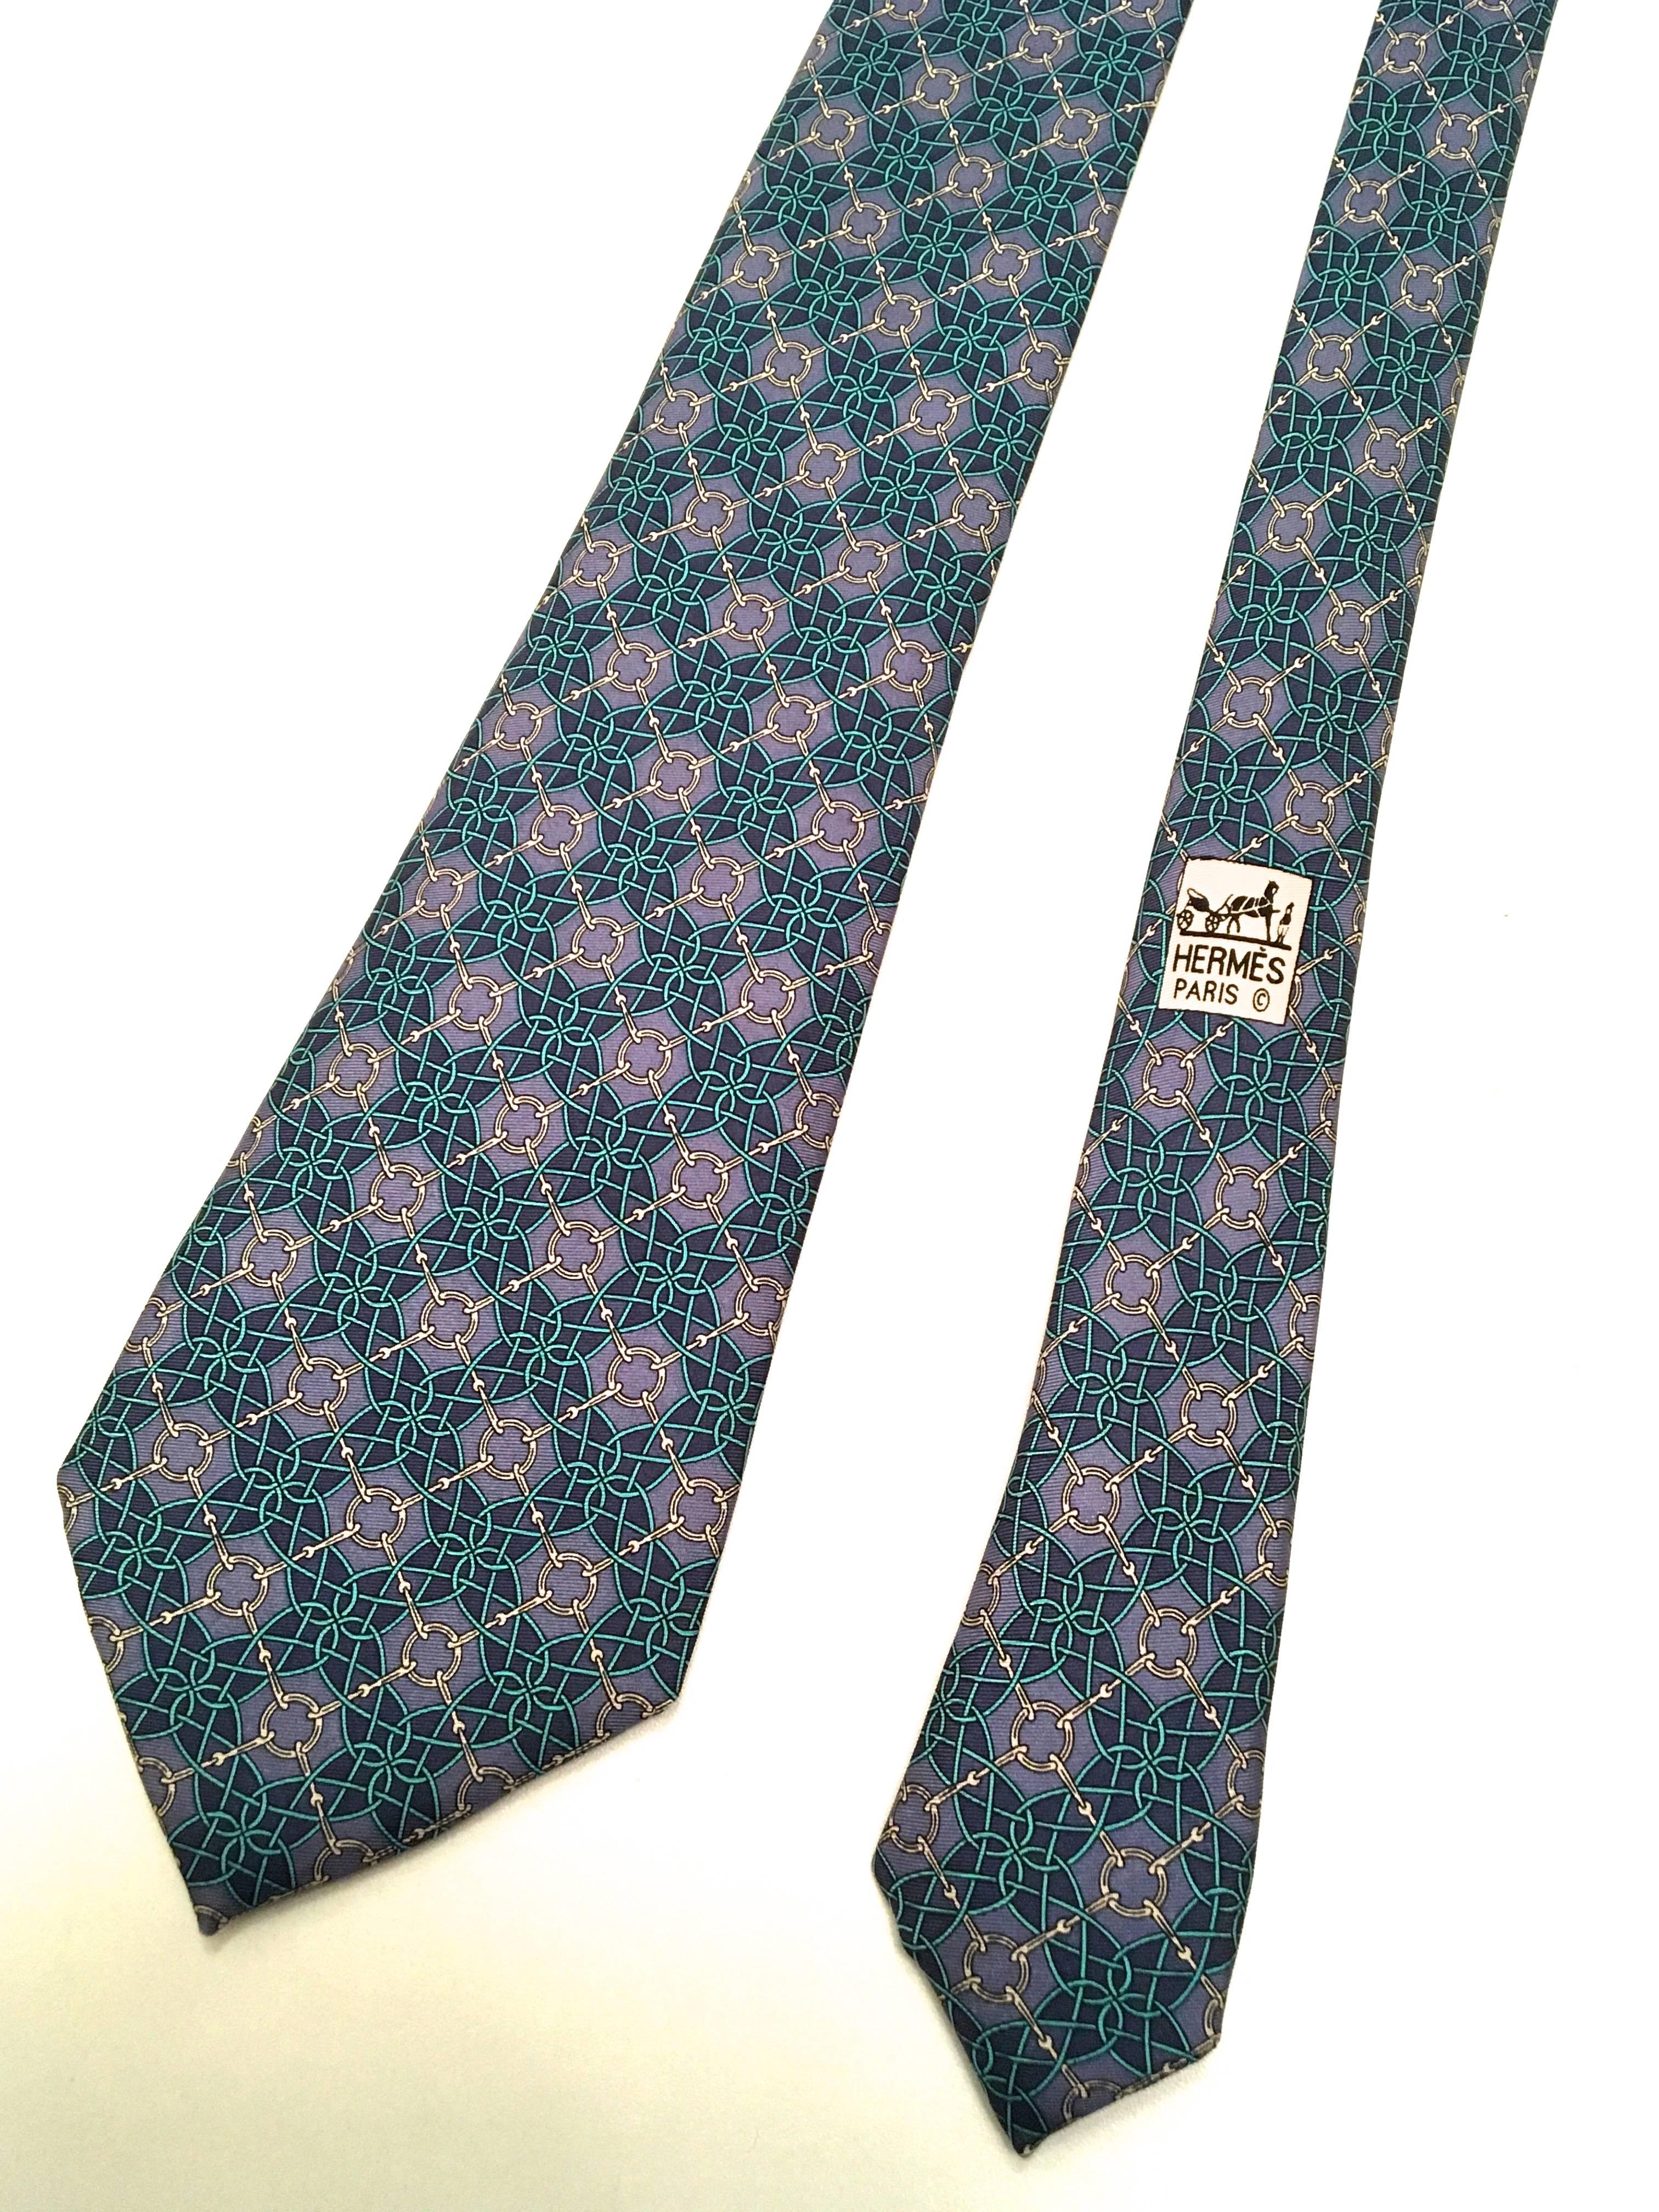 Presented here is a beautiful necktie from Hermes Paris. This beautiful  tie is a geometric pattern consisting of abstract shapes in a tessellation design. The color is comprised of shades of blue, purple and green. The tie measures  3.5 inches wide